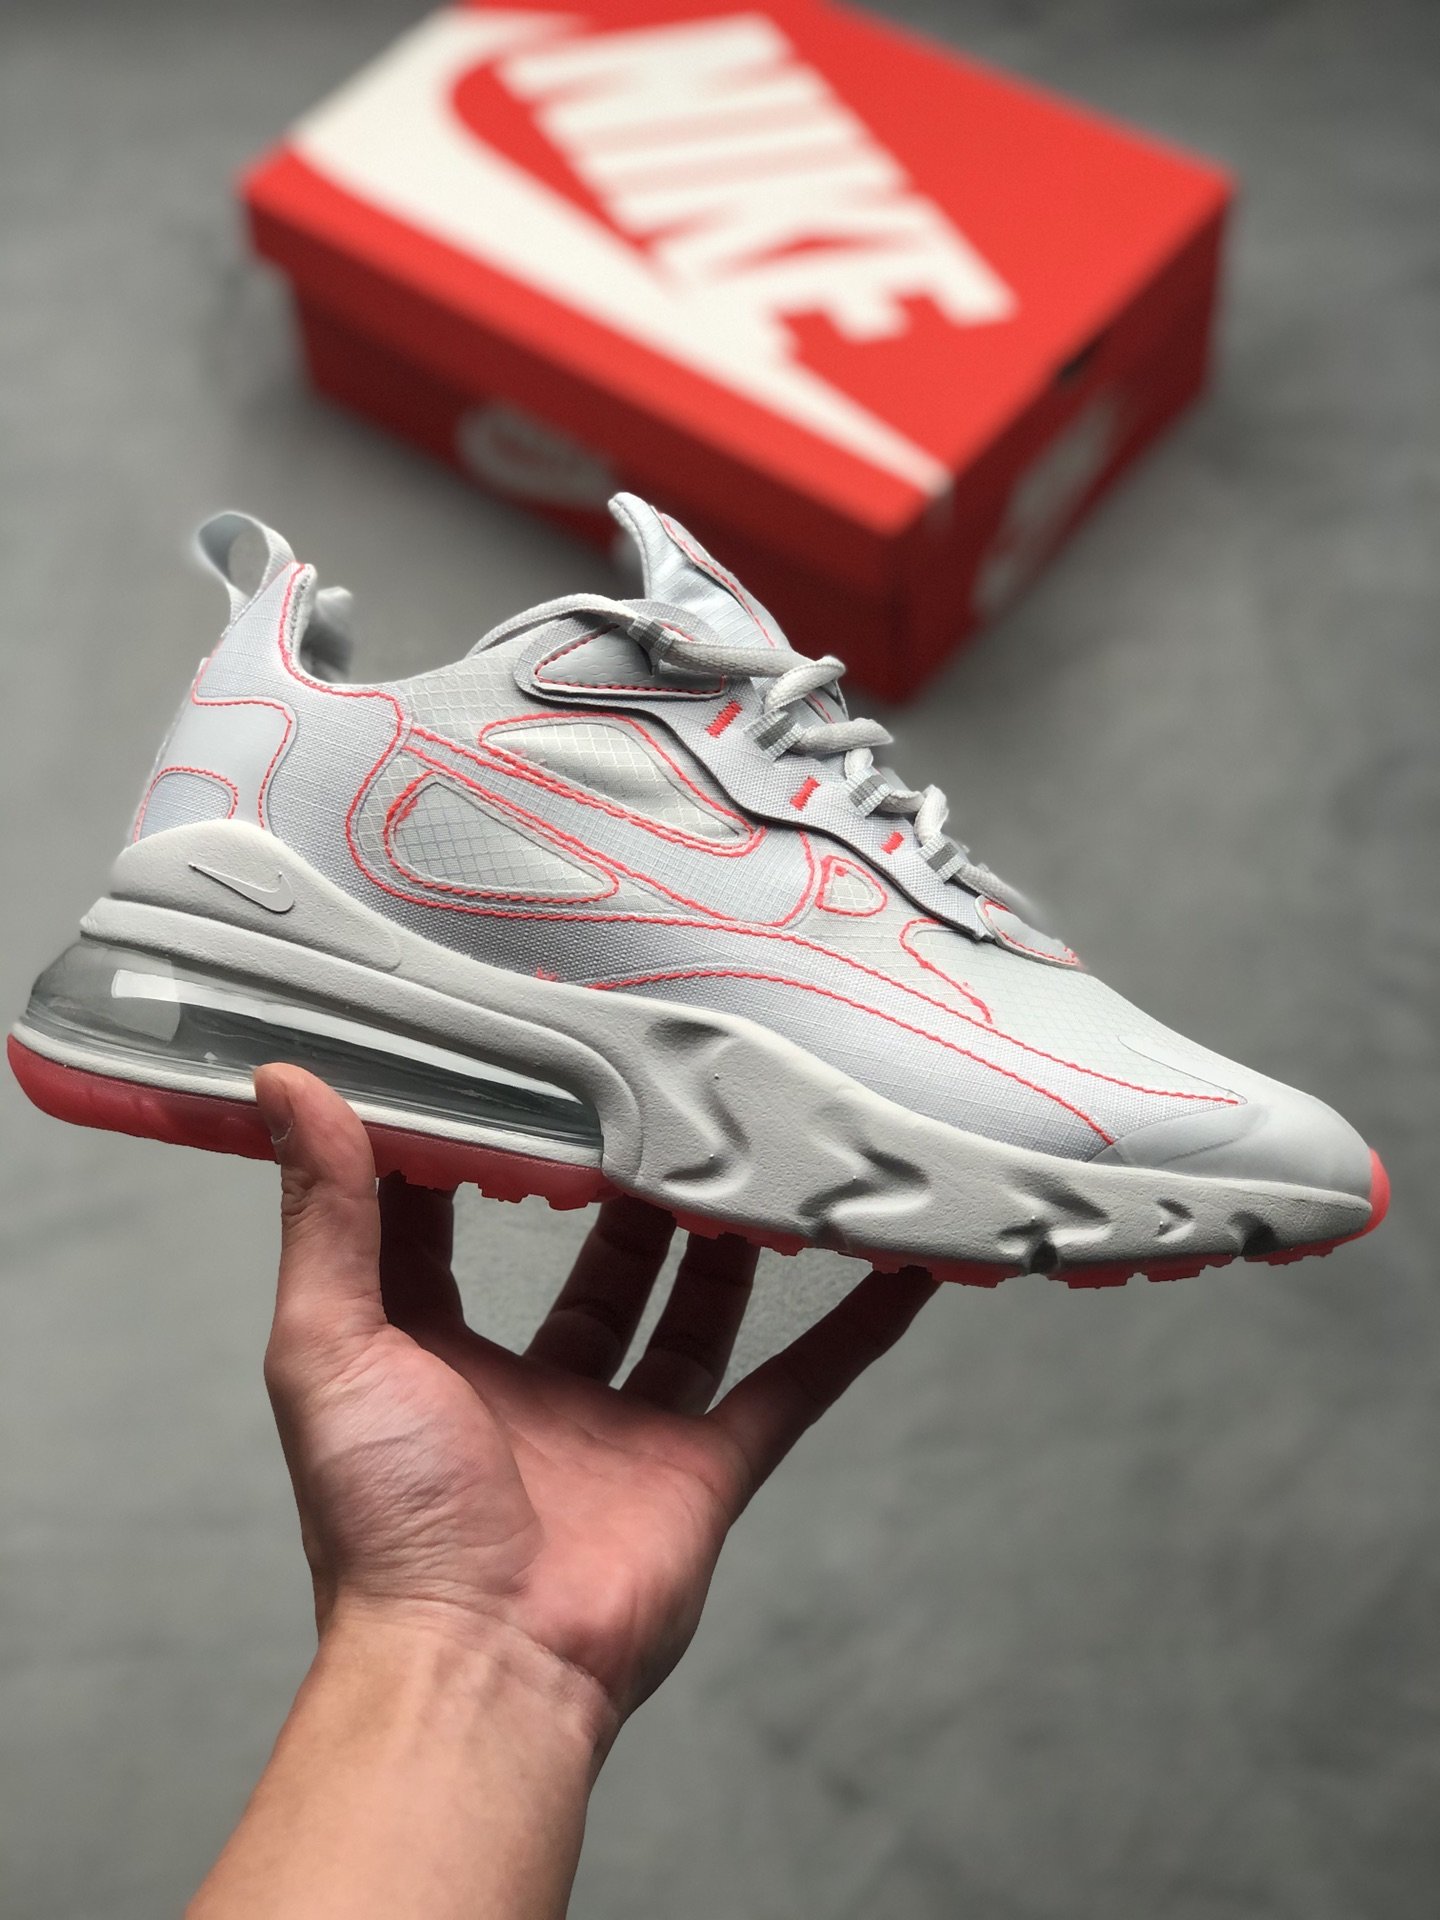 nike 270 react special edition